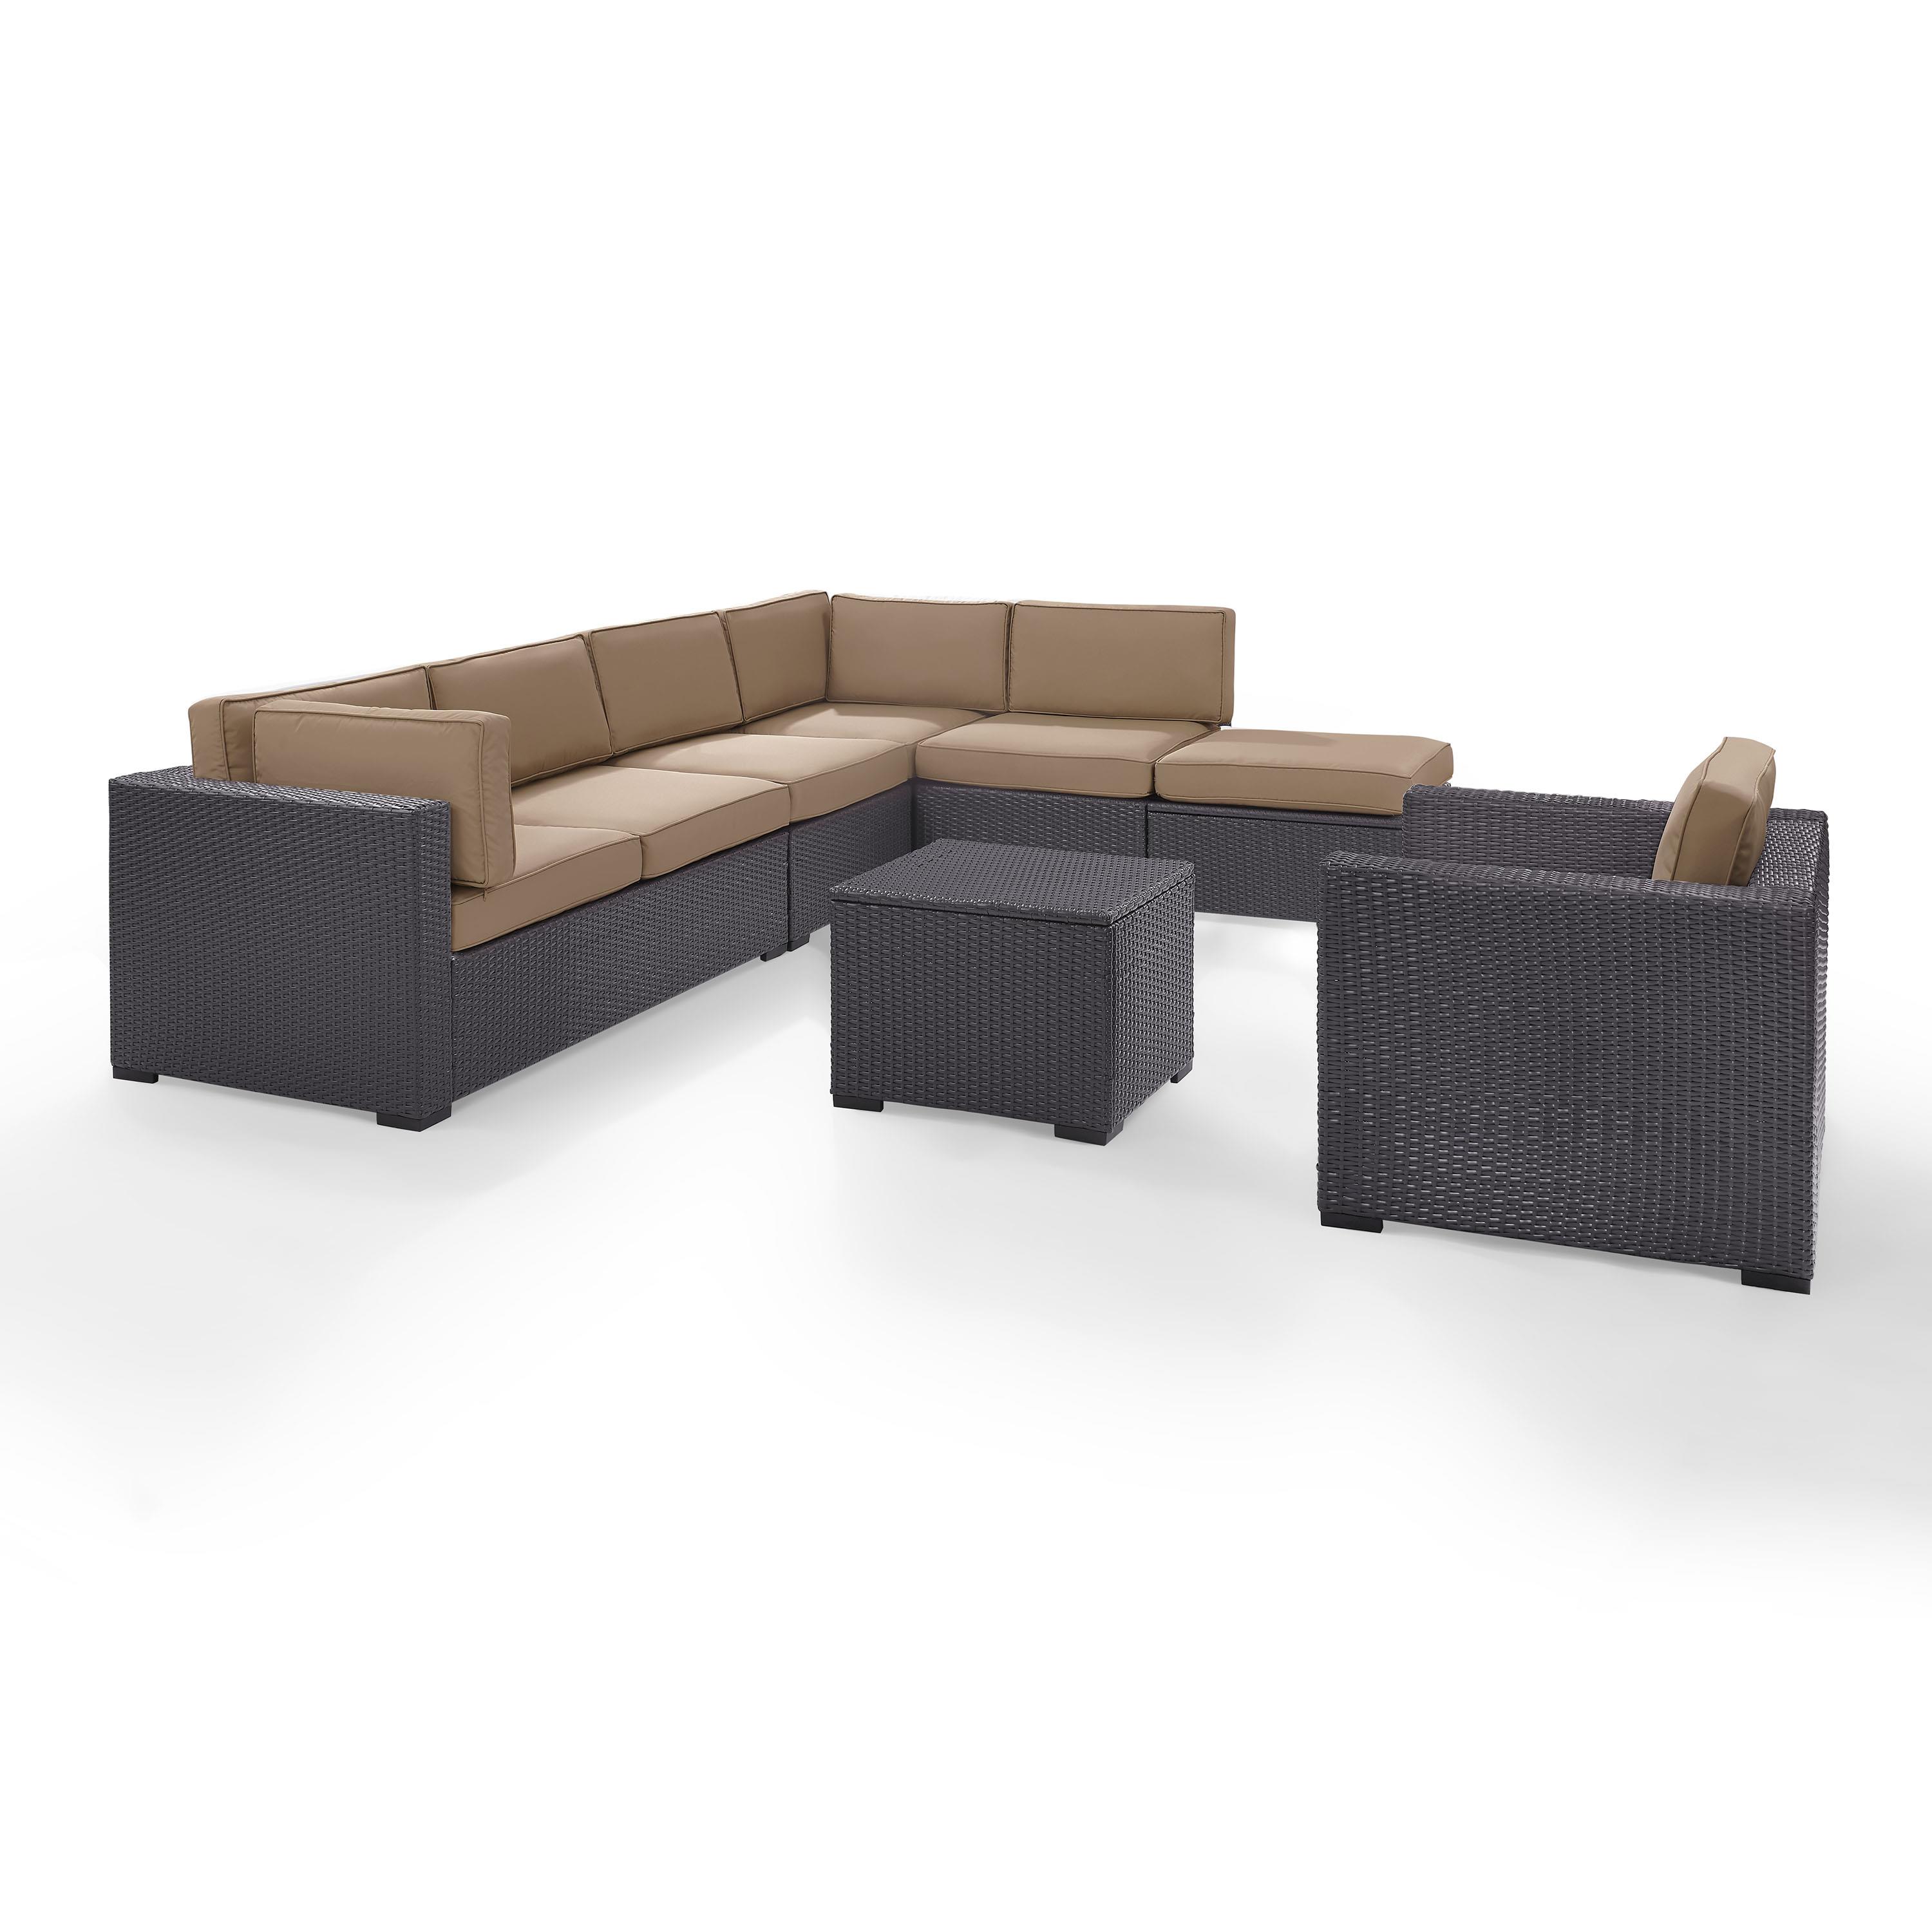 Biscayne 7 Person Outdoor Wicker Seating Set In Mocha - Two Loveseats, One Armless Chair, One Arm Chair, Coffee Table, Ottoman - image 2 of 4